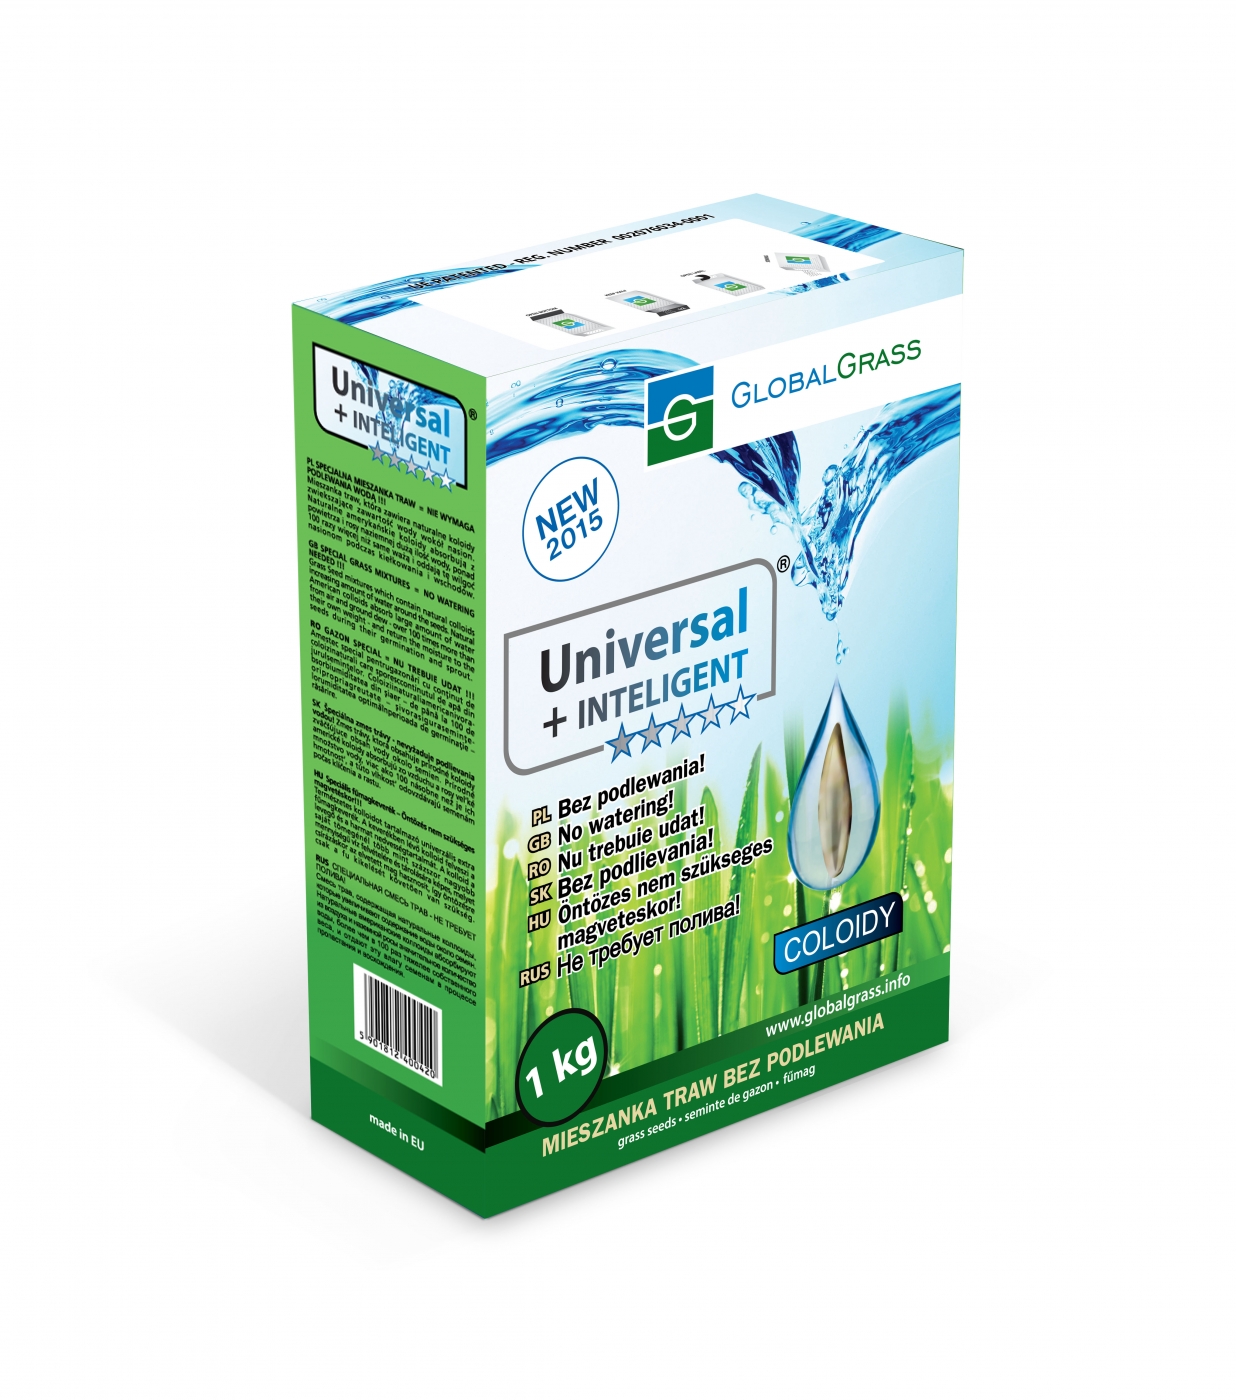 Grass seed Universal mix with water retention coating 1 kg